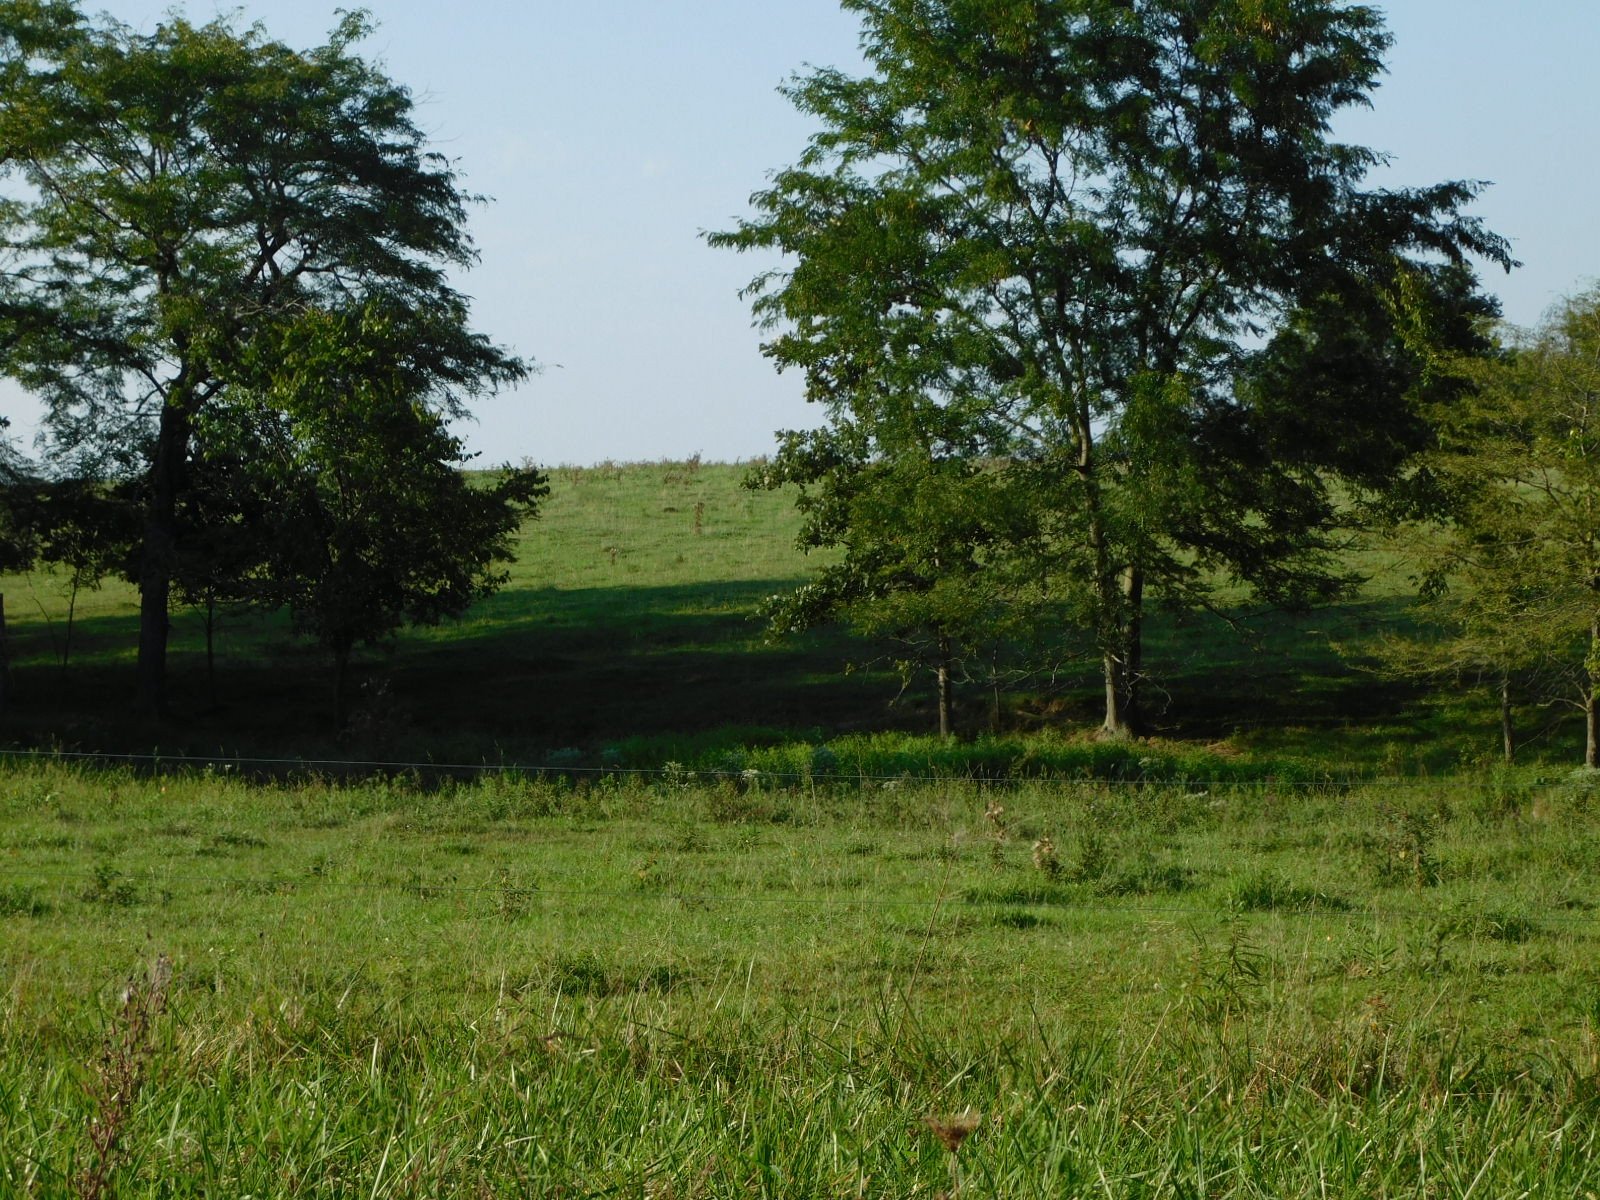 Pasture - South Side